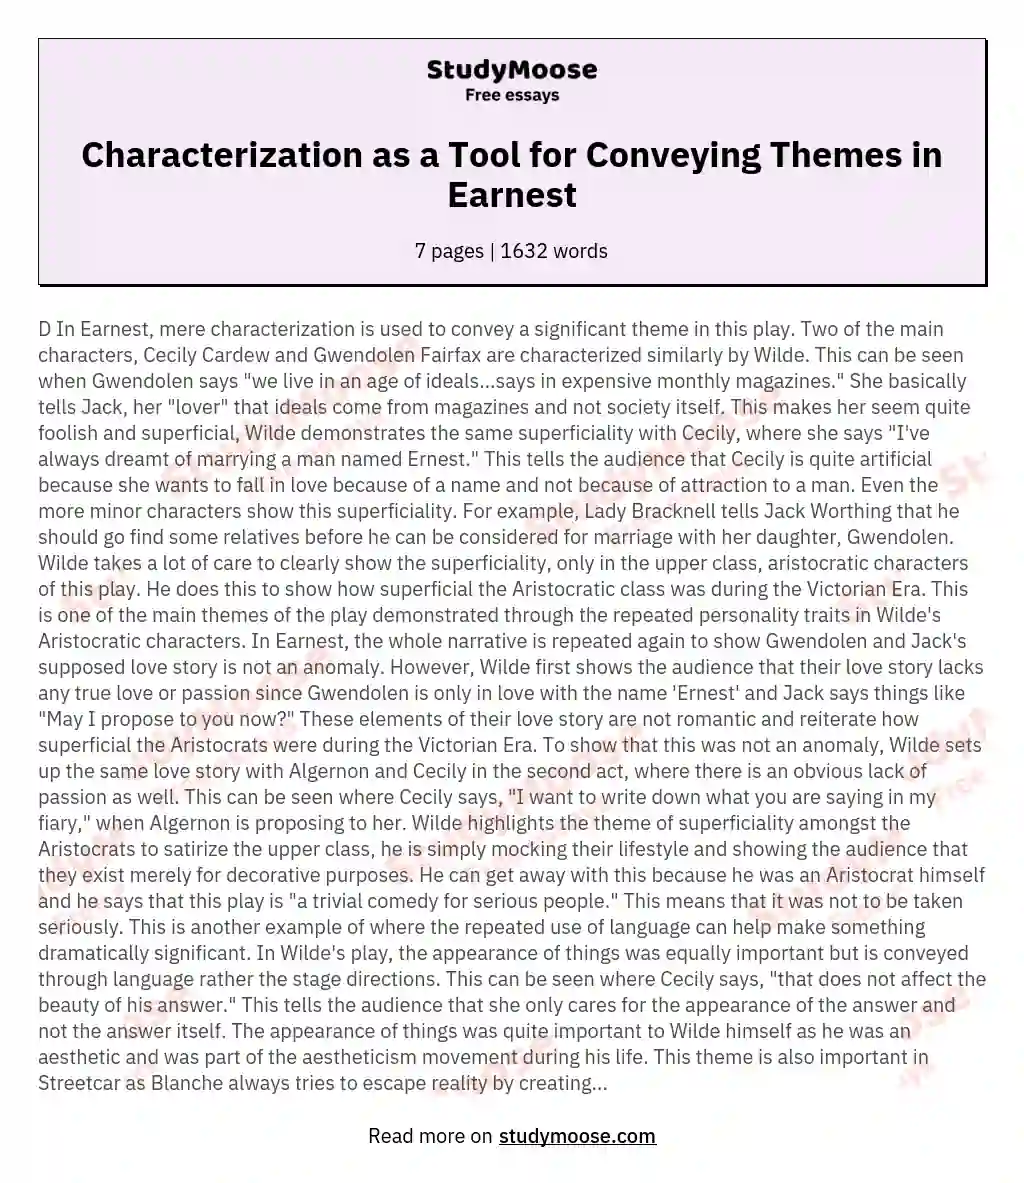 Characterization as a Tool for Conveying Themes in Earnest essay